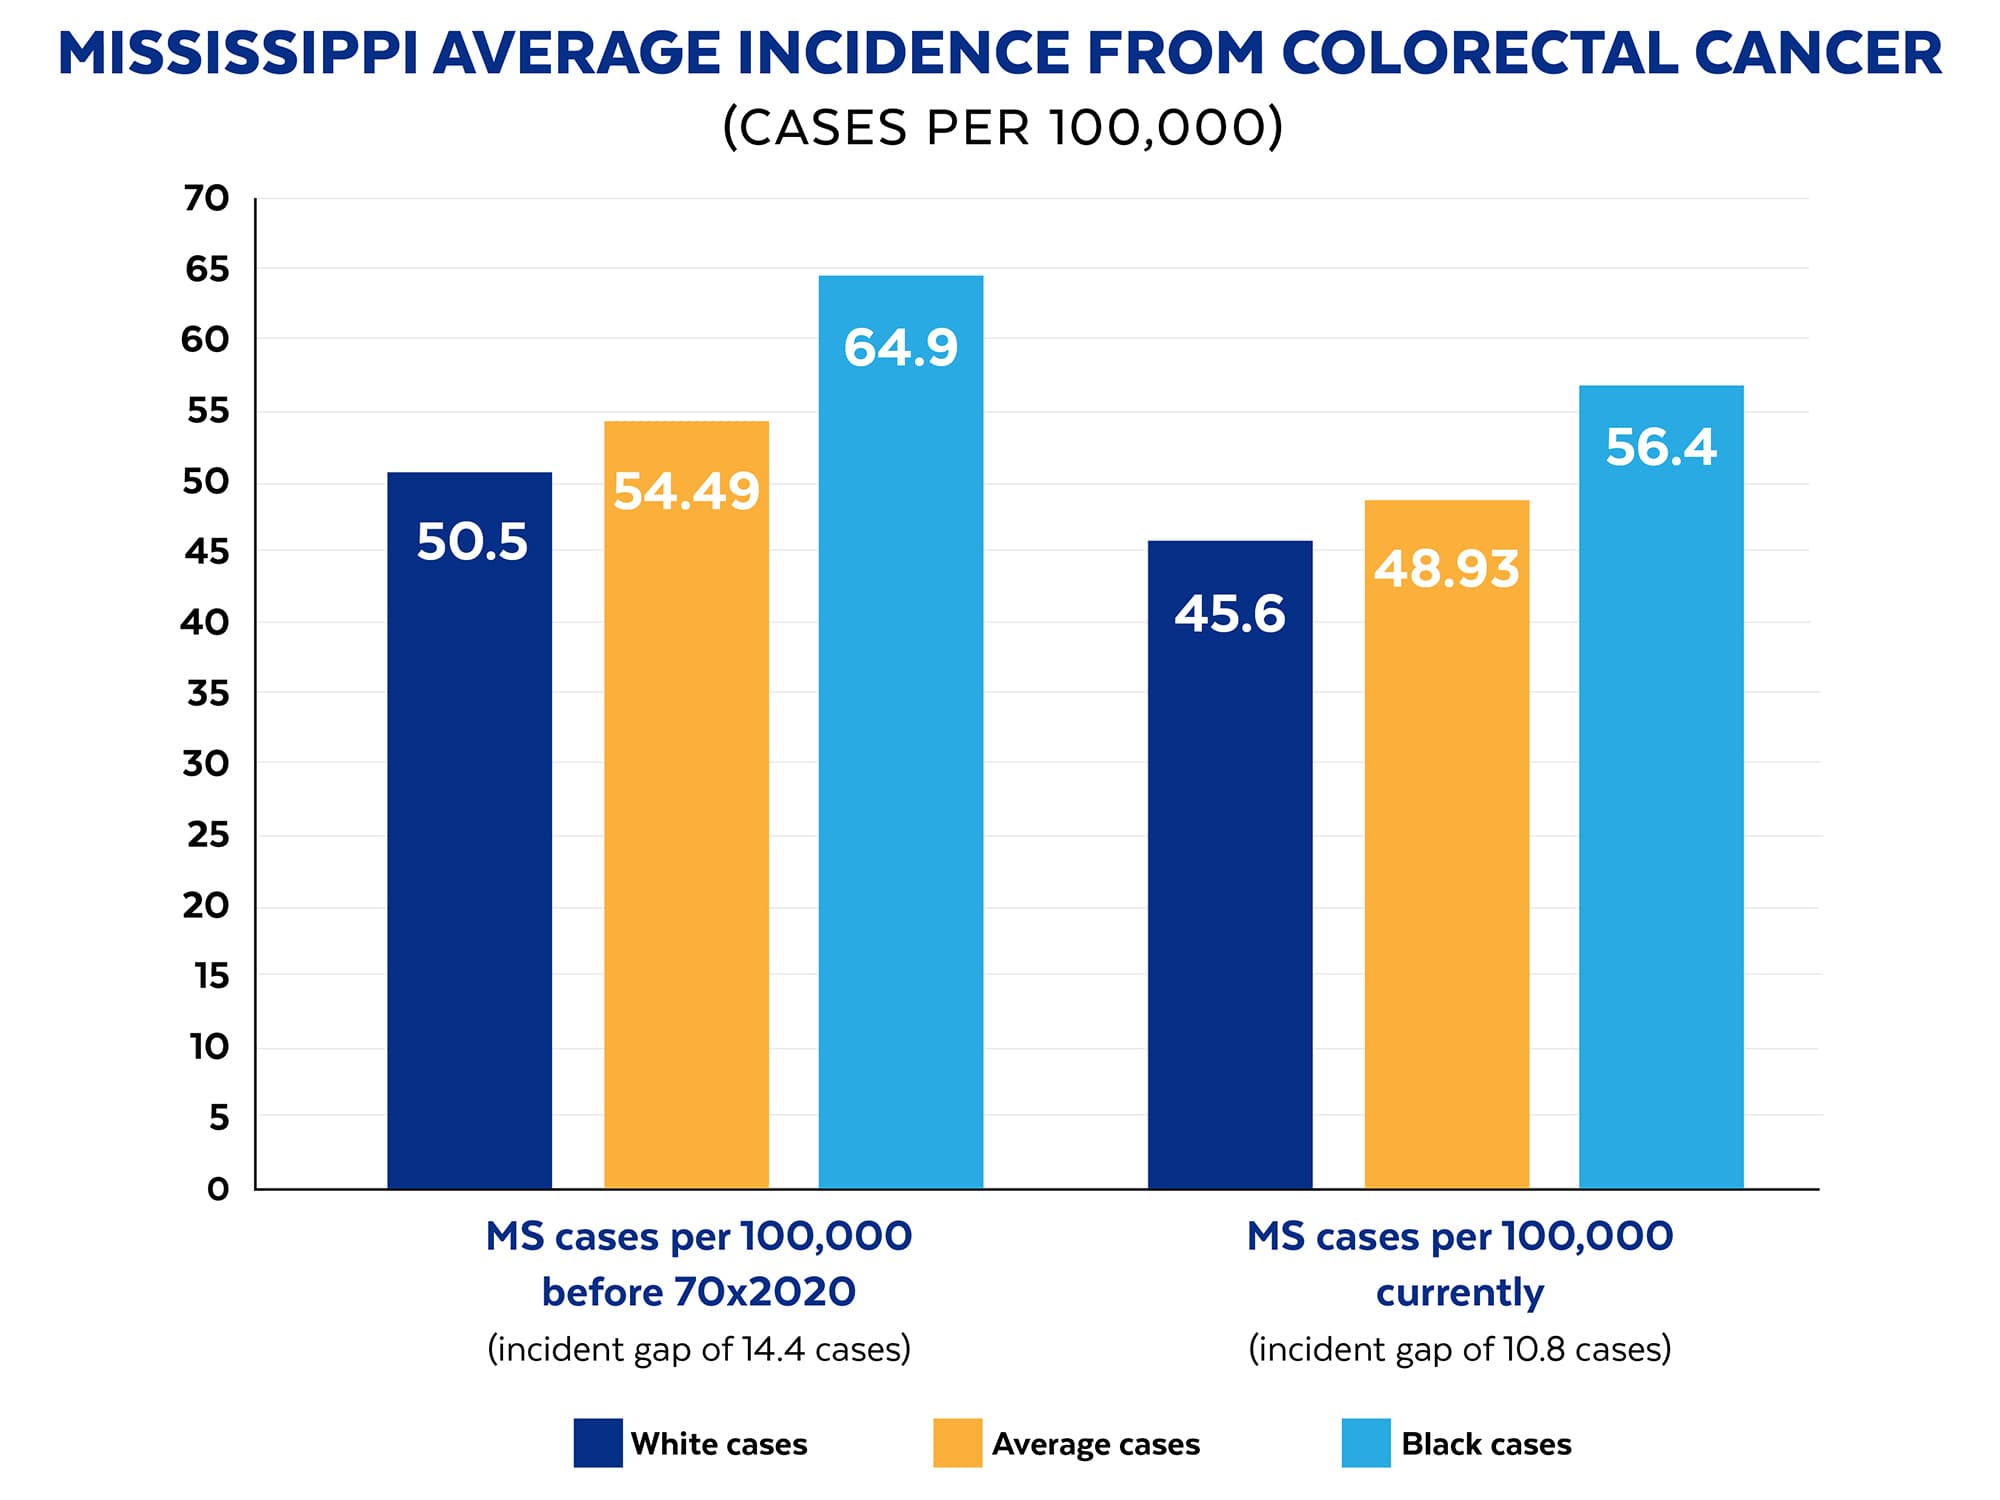 Before 70X2020, the average incidence of colorectal cancer in Mississippi was 54.49 cases per 100,000 population, with black incidence standing at 64.9 cases and white incidence at 50.5 cases, representing a gap in incidence of 14.4 cases per 100,000 population.